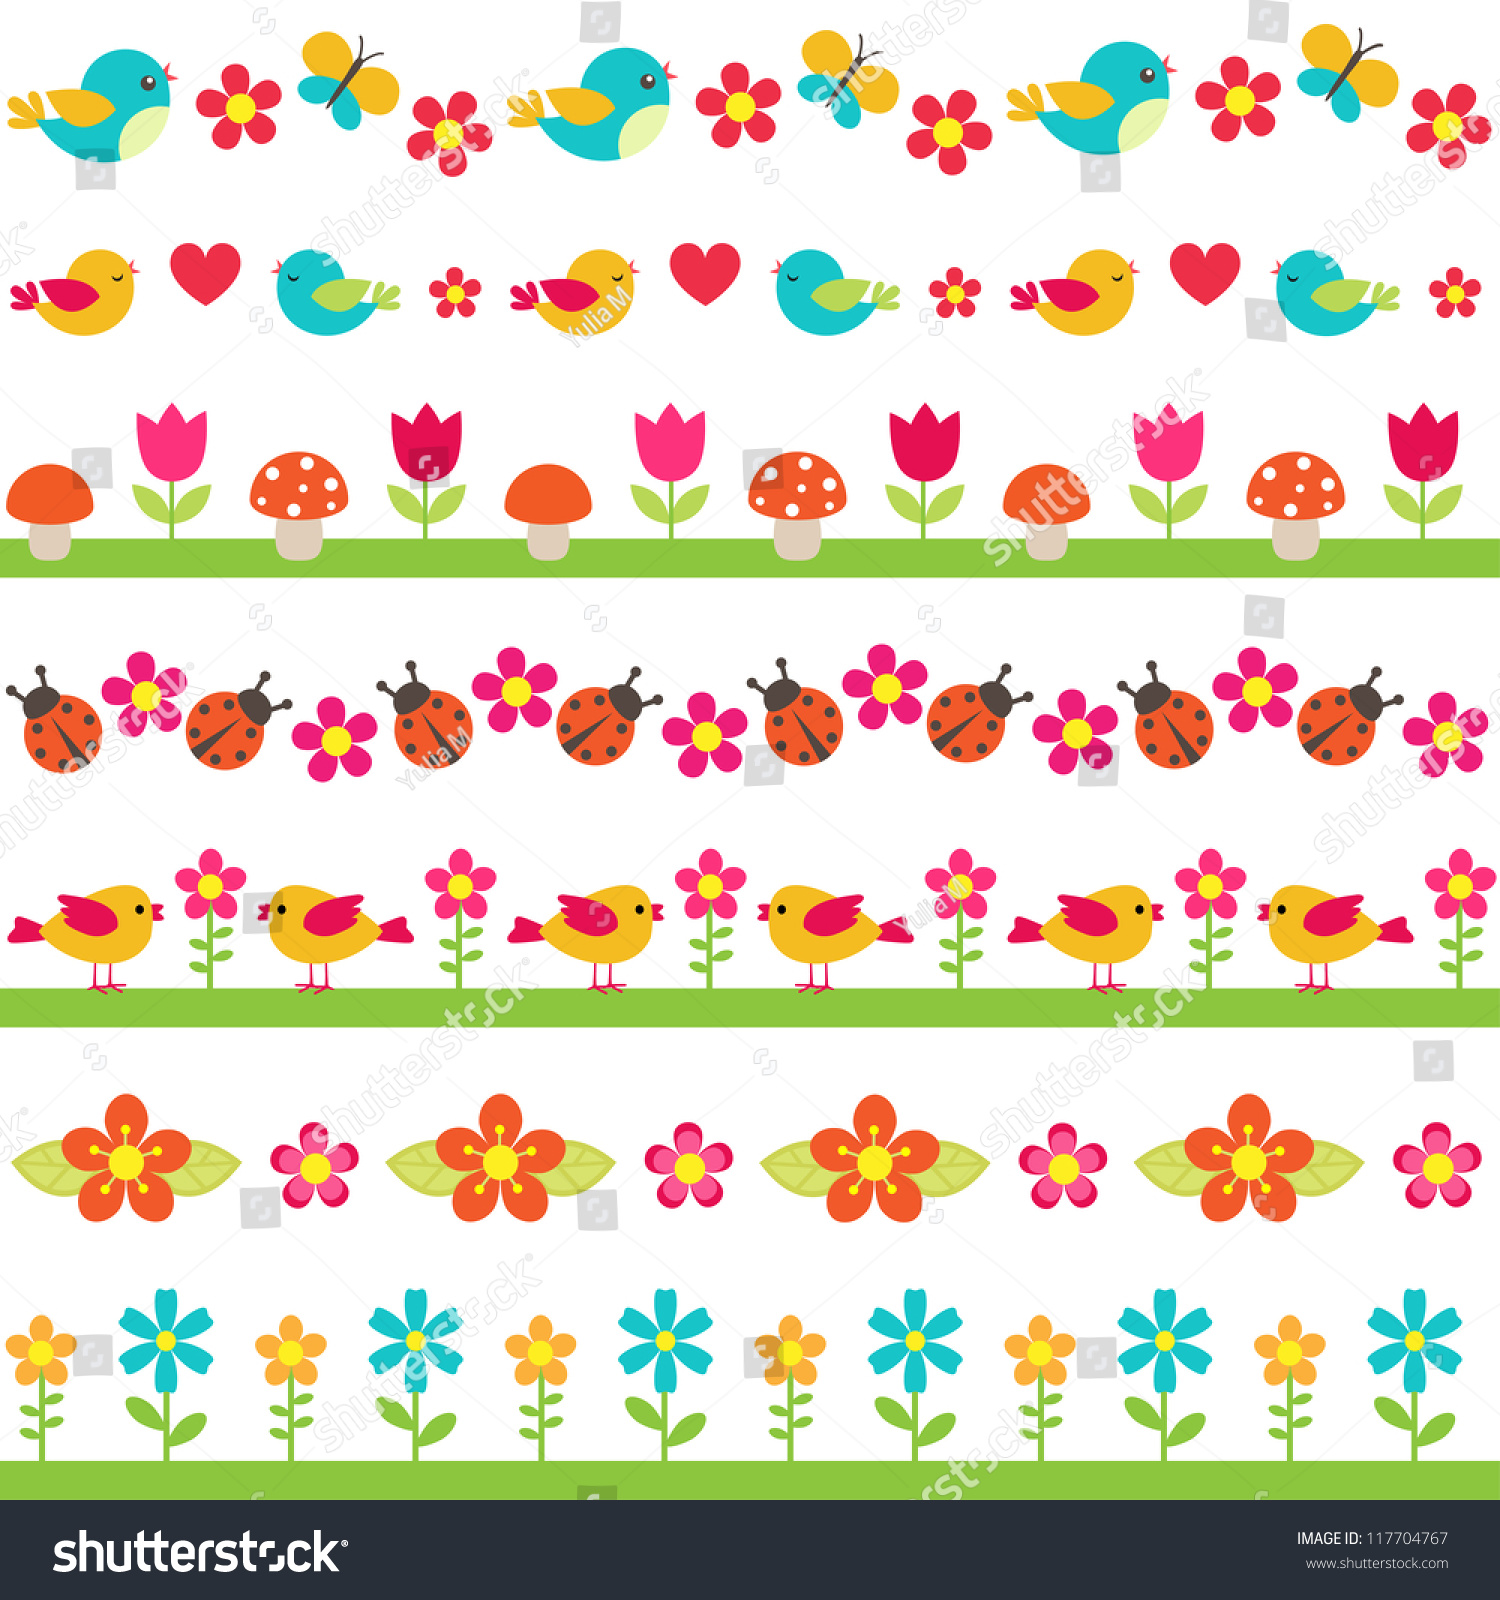 Cute Seamless Borders With Birds And Flowers. Raster Version. Stock ...